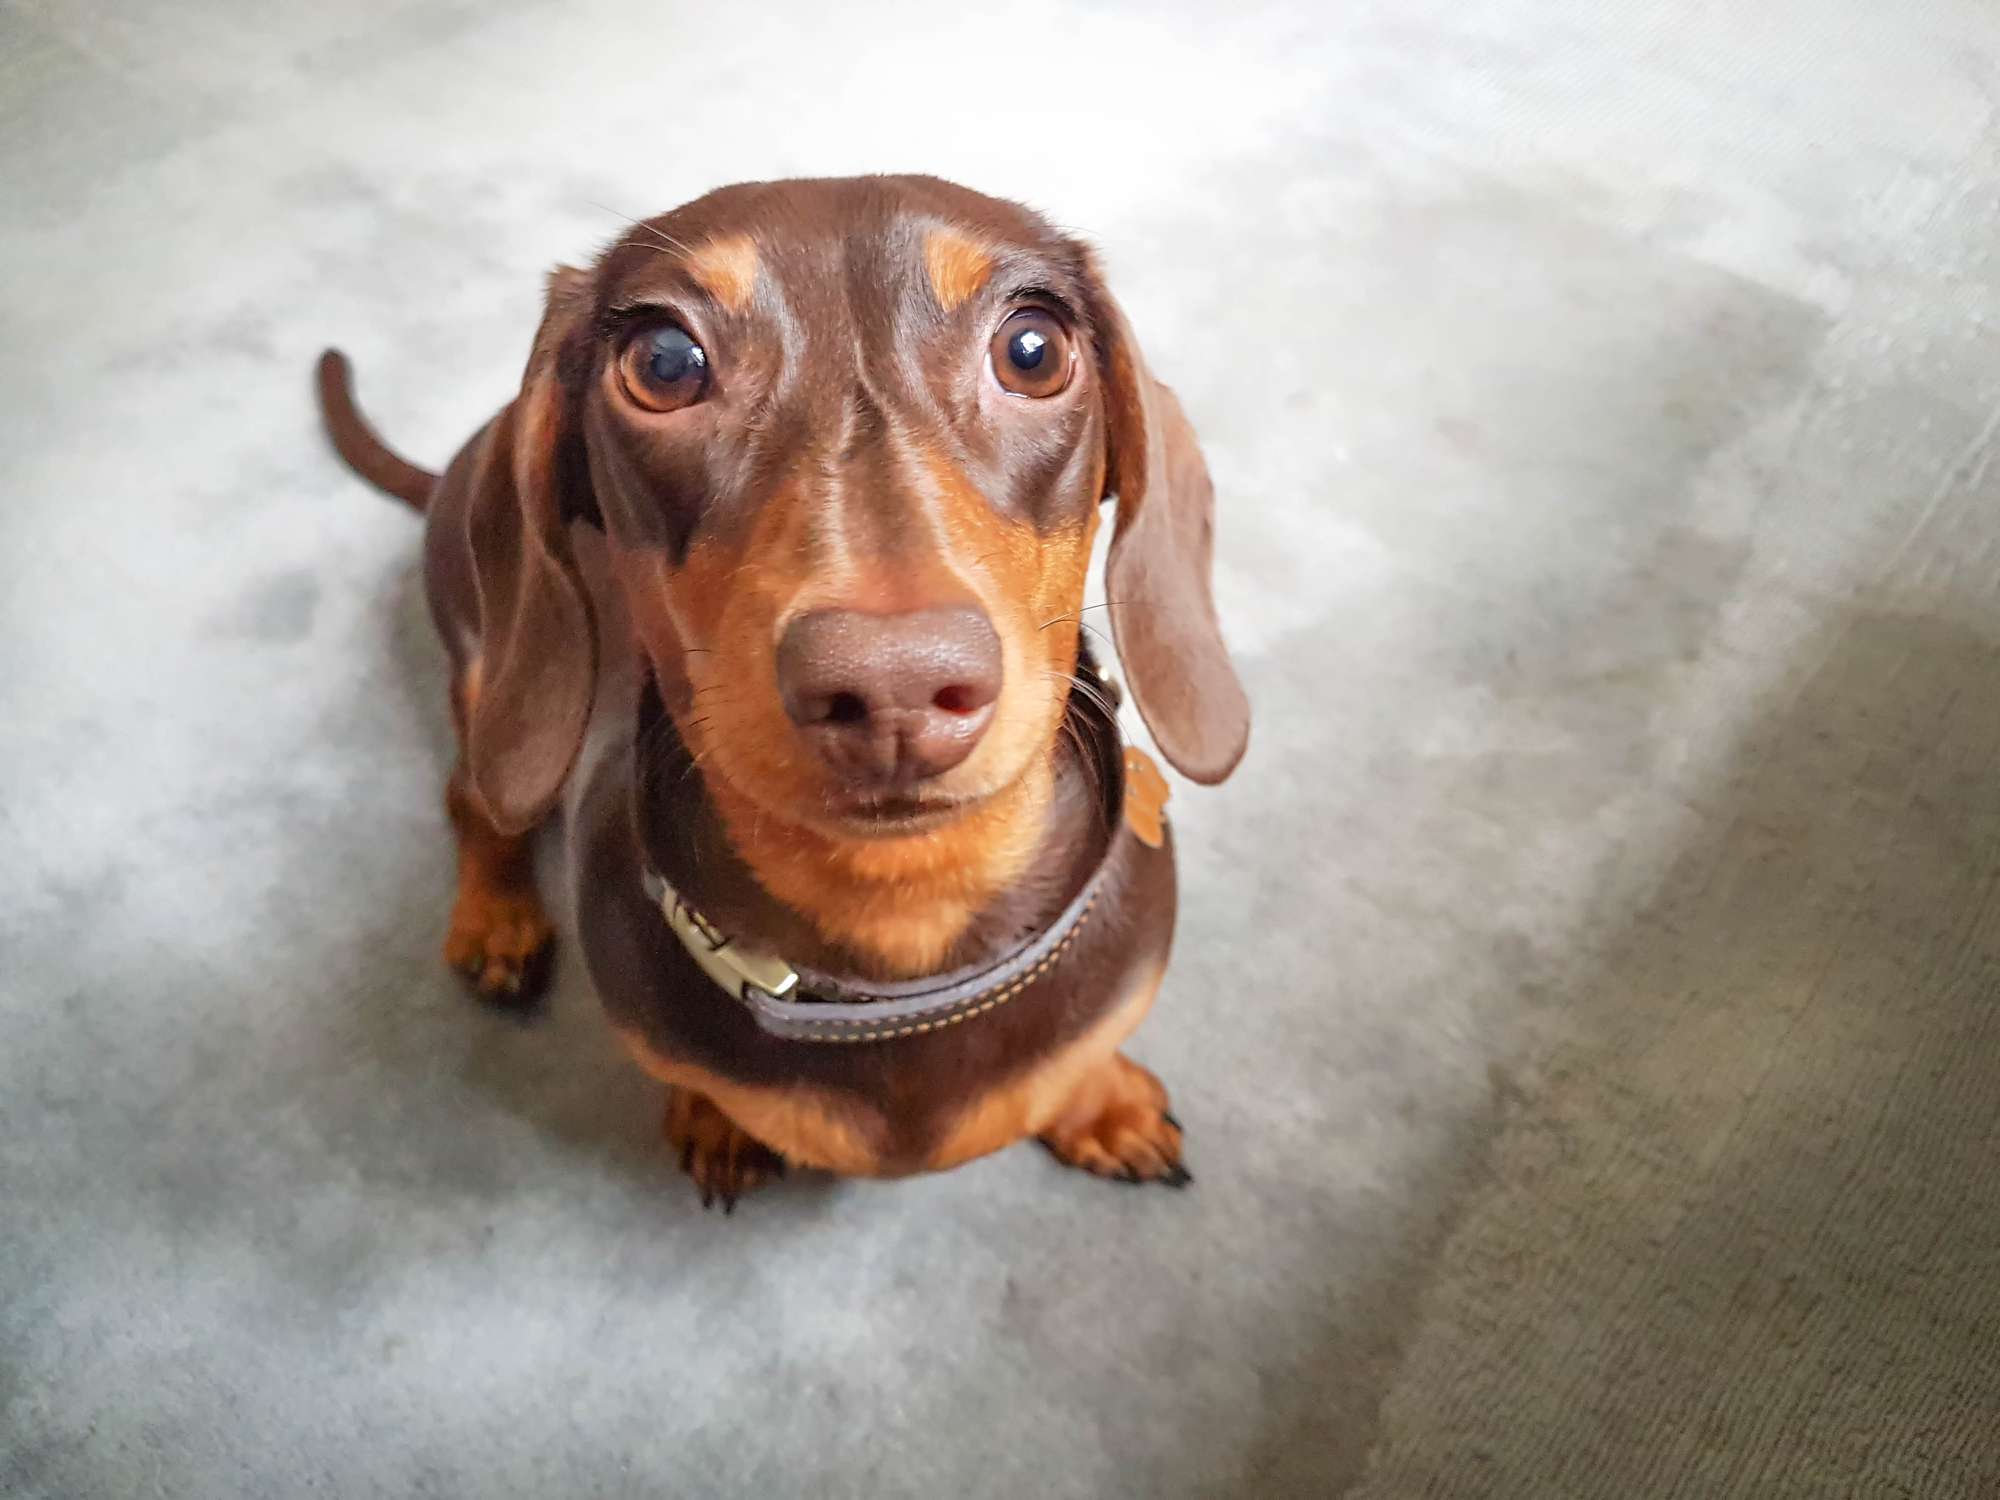 A Dachshund looking into the camera.